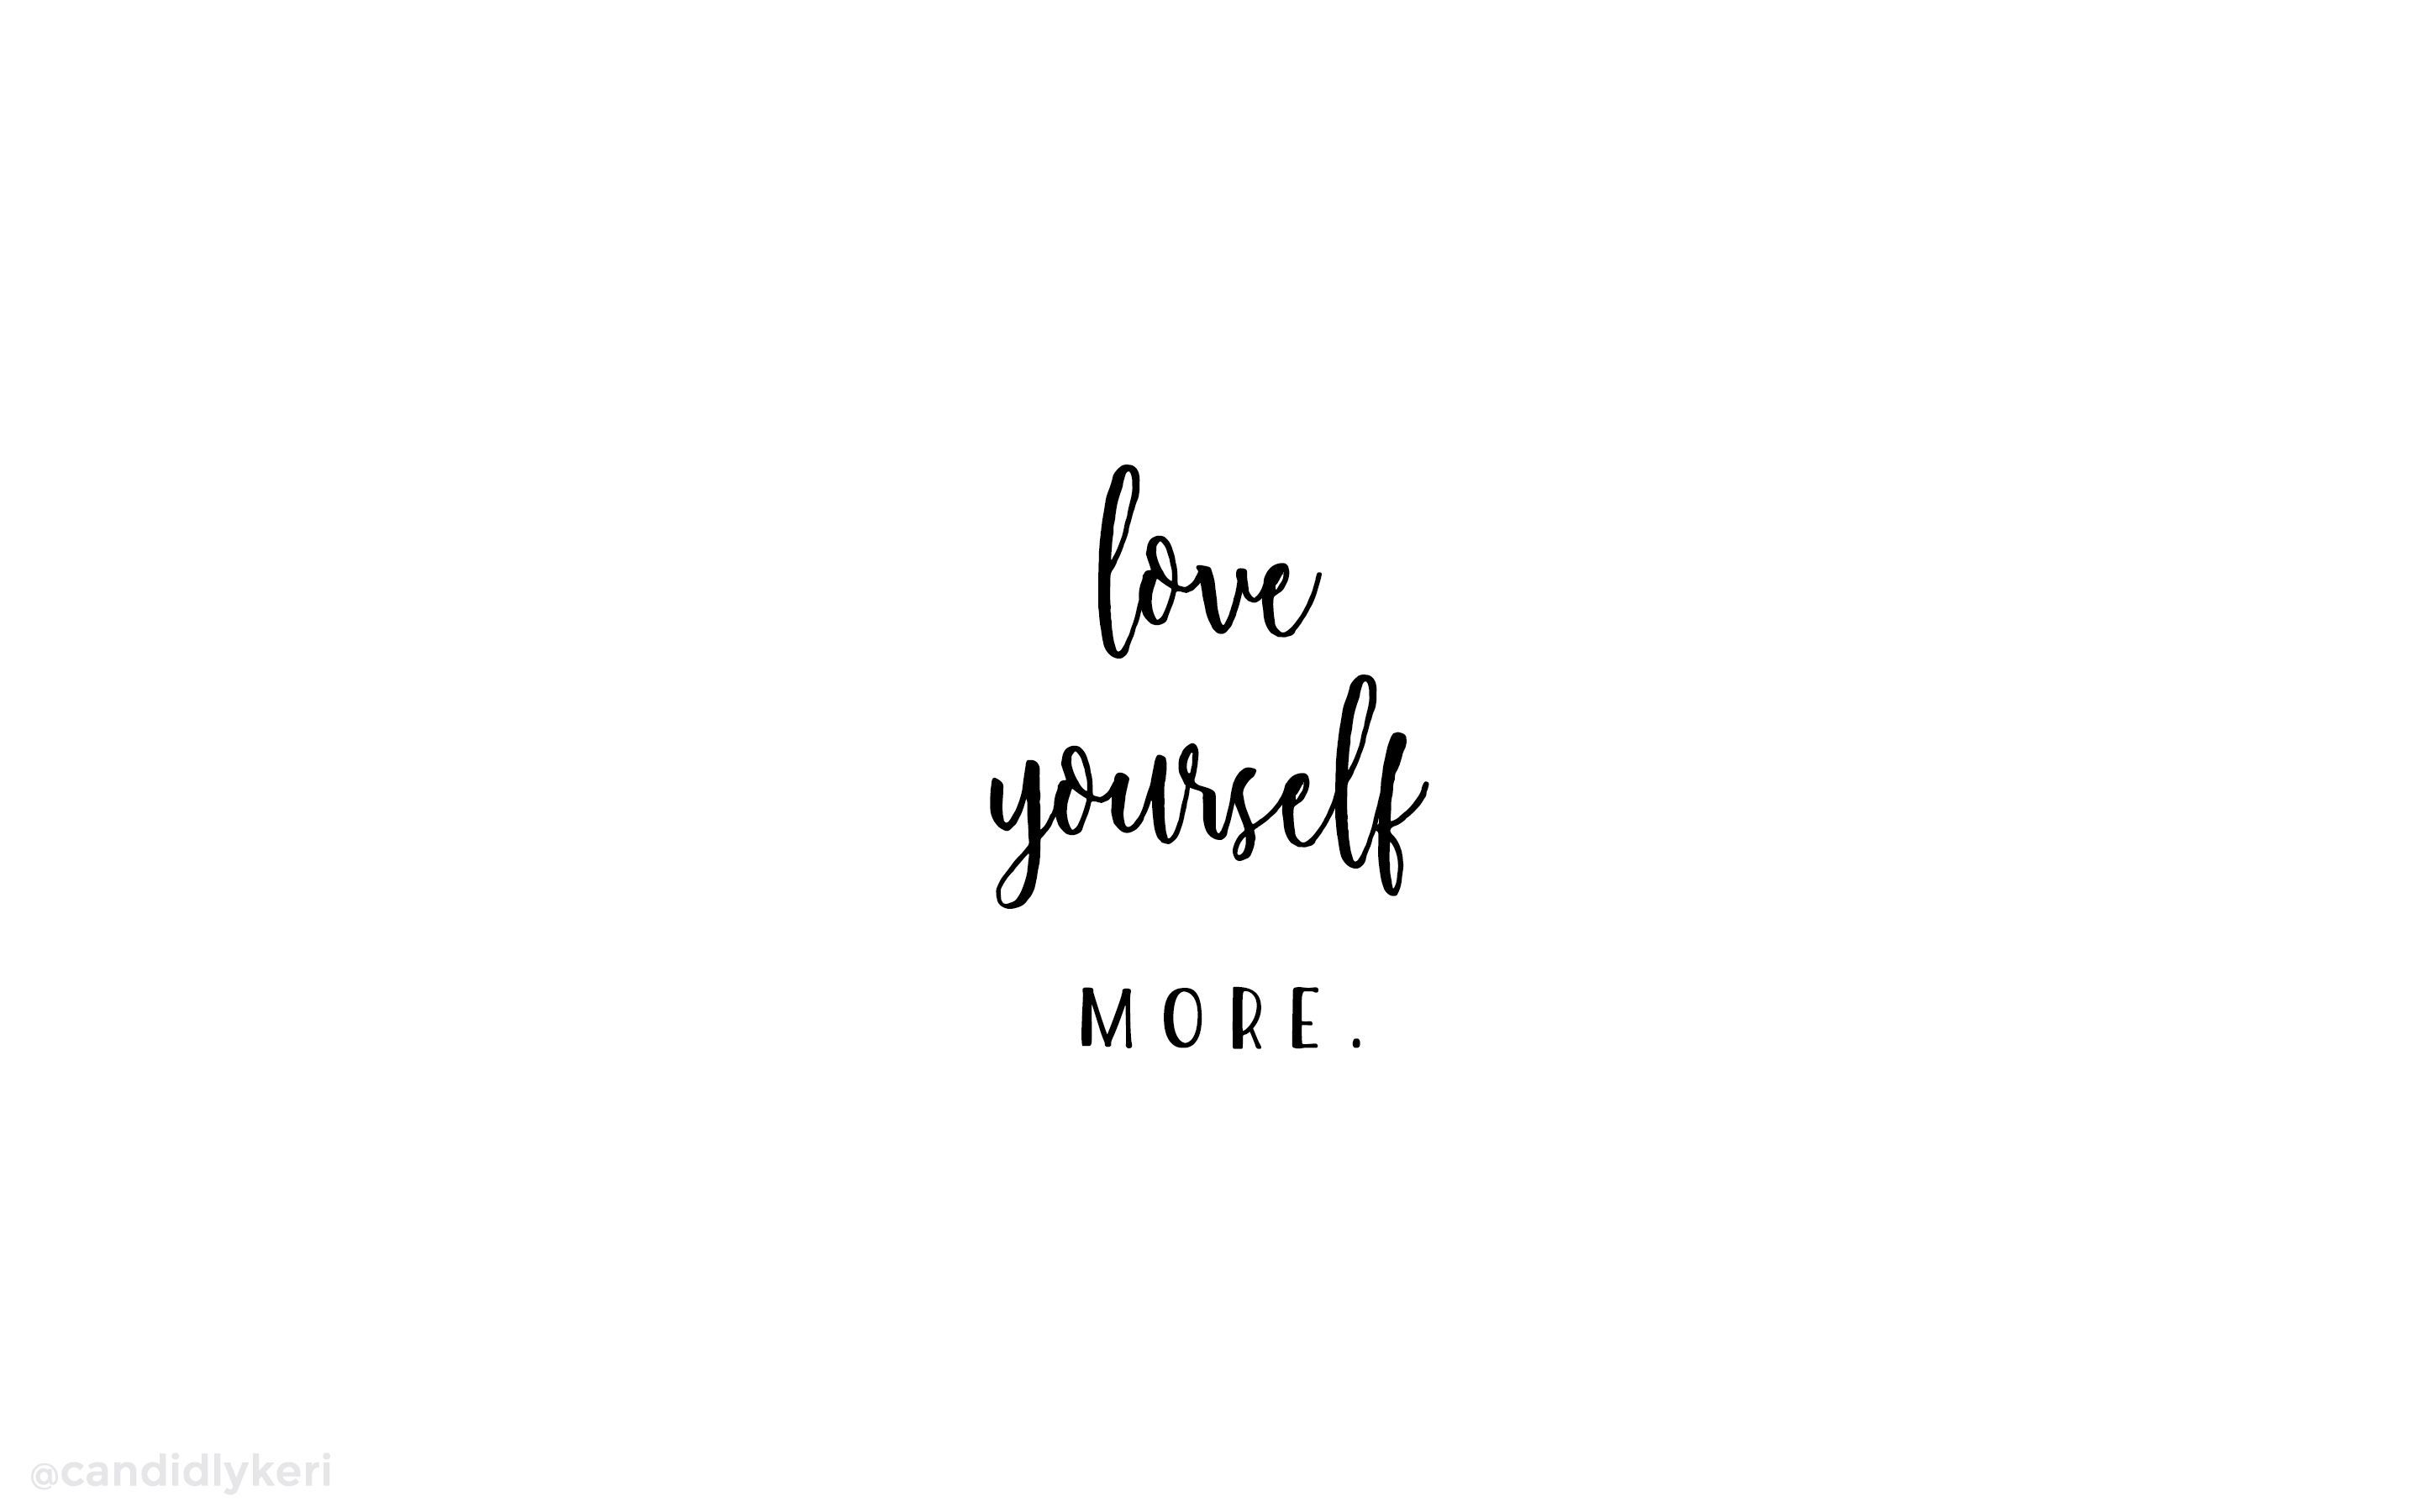 Love yourself more desktop wallpaper for your phone - White, desktop, black and white, cute white, positive, laptop, calligraphy